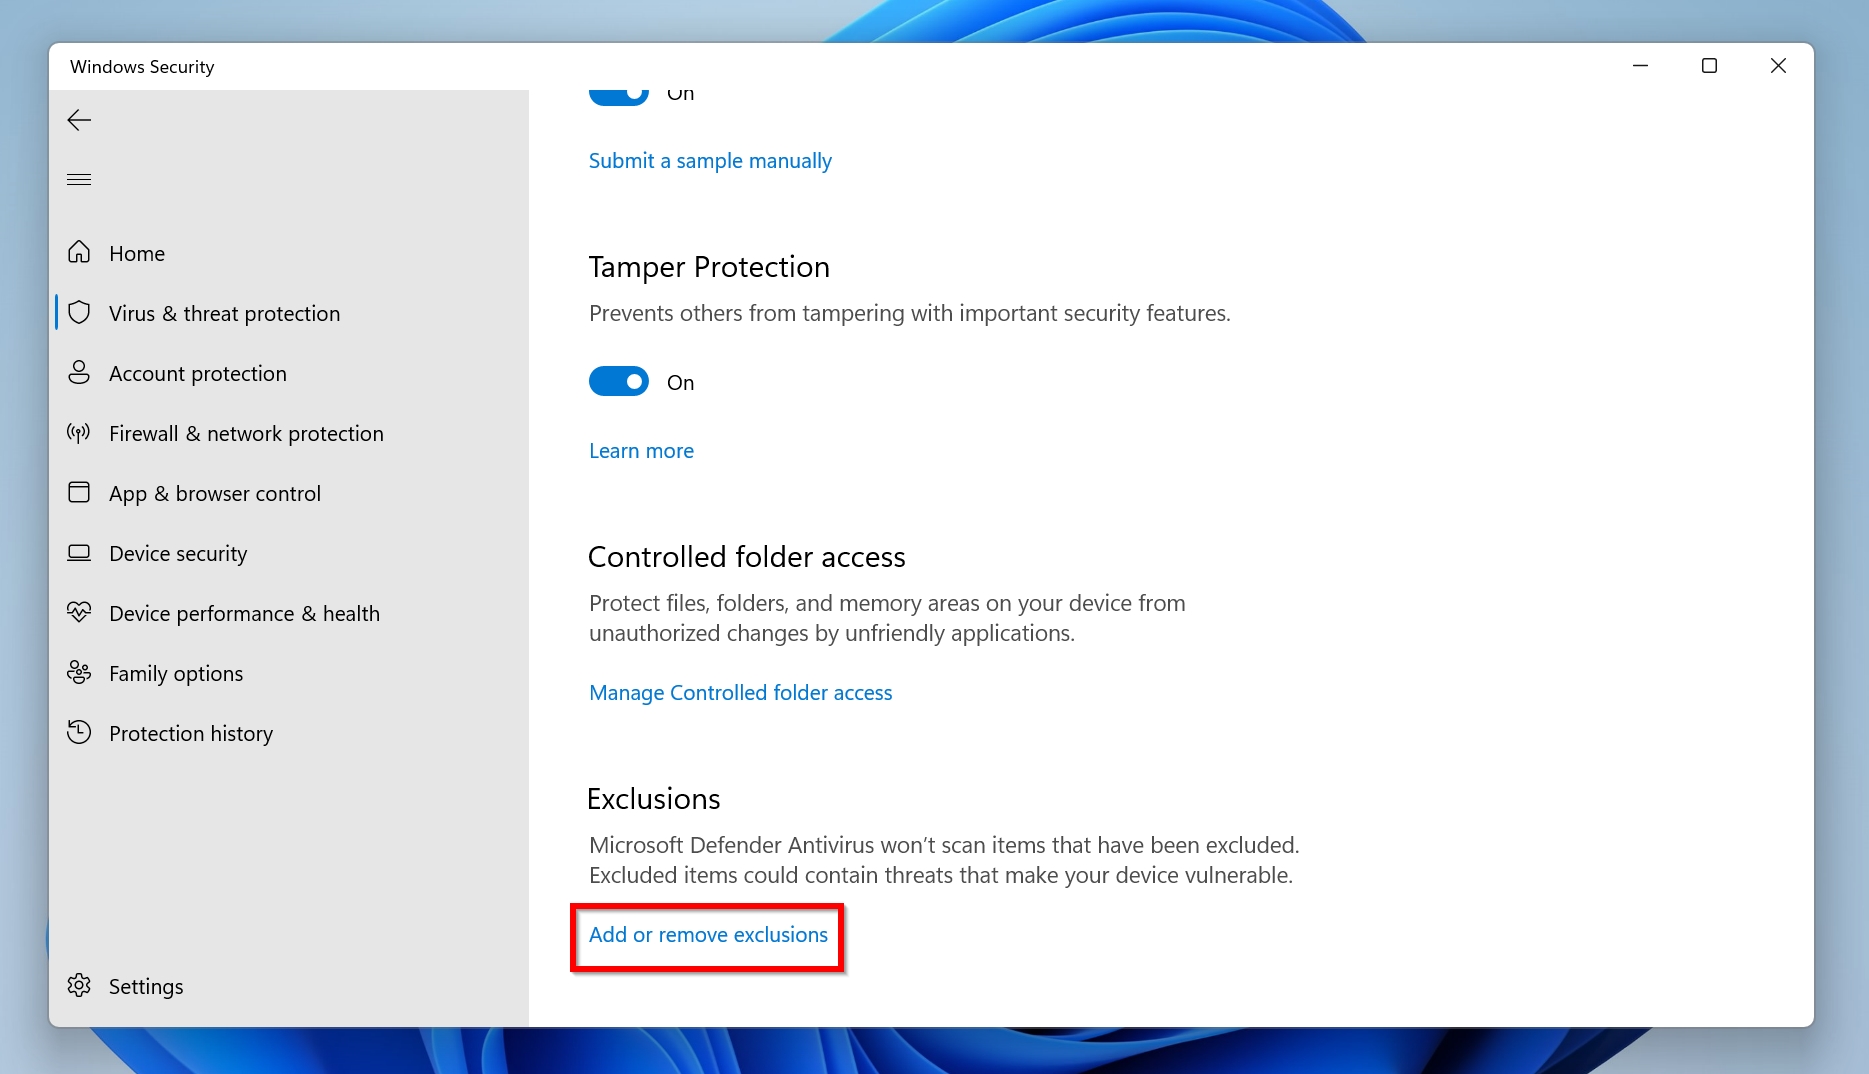 Add or remove exclusion option in Windows Defender.